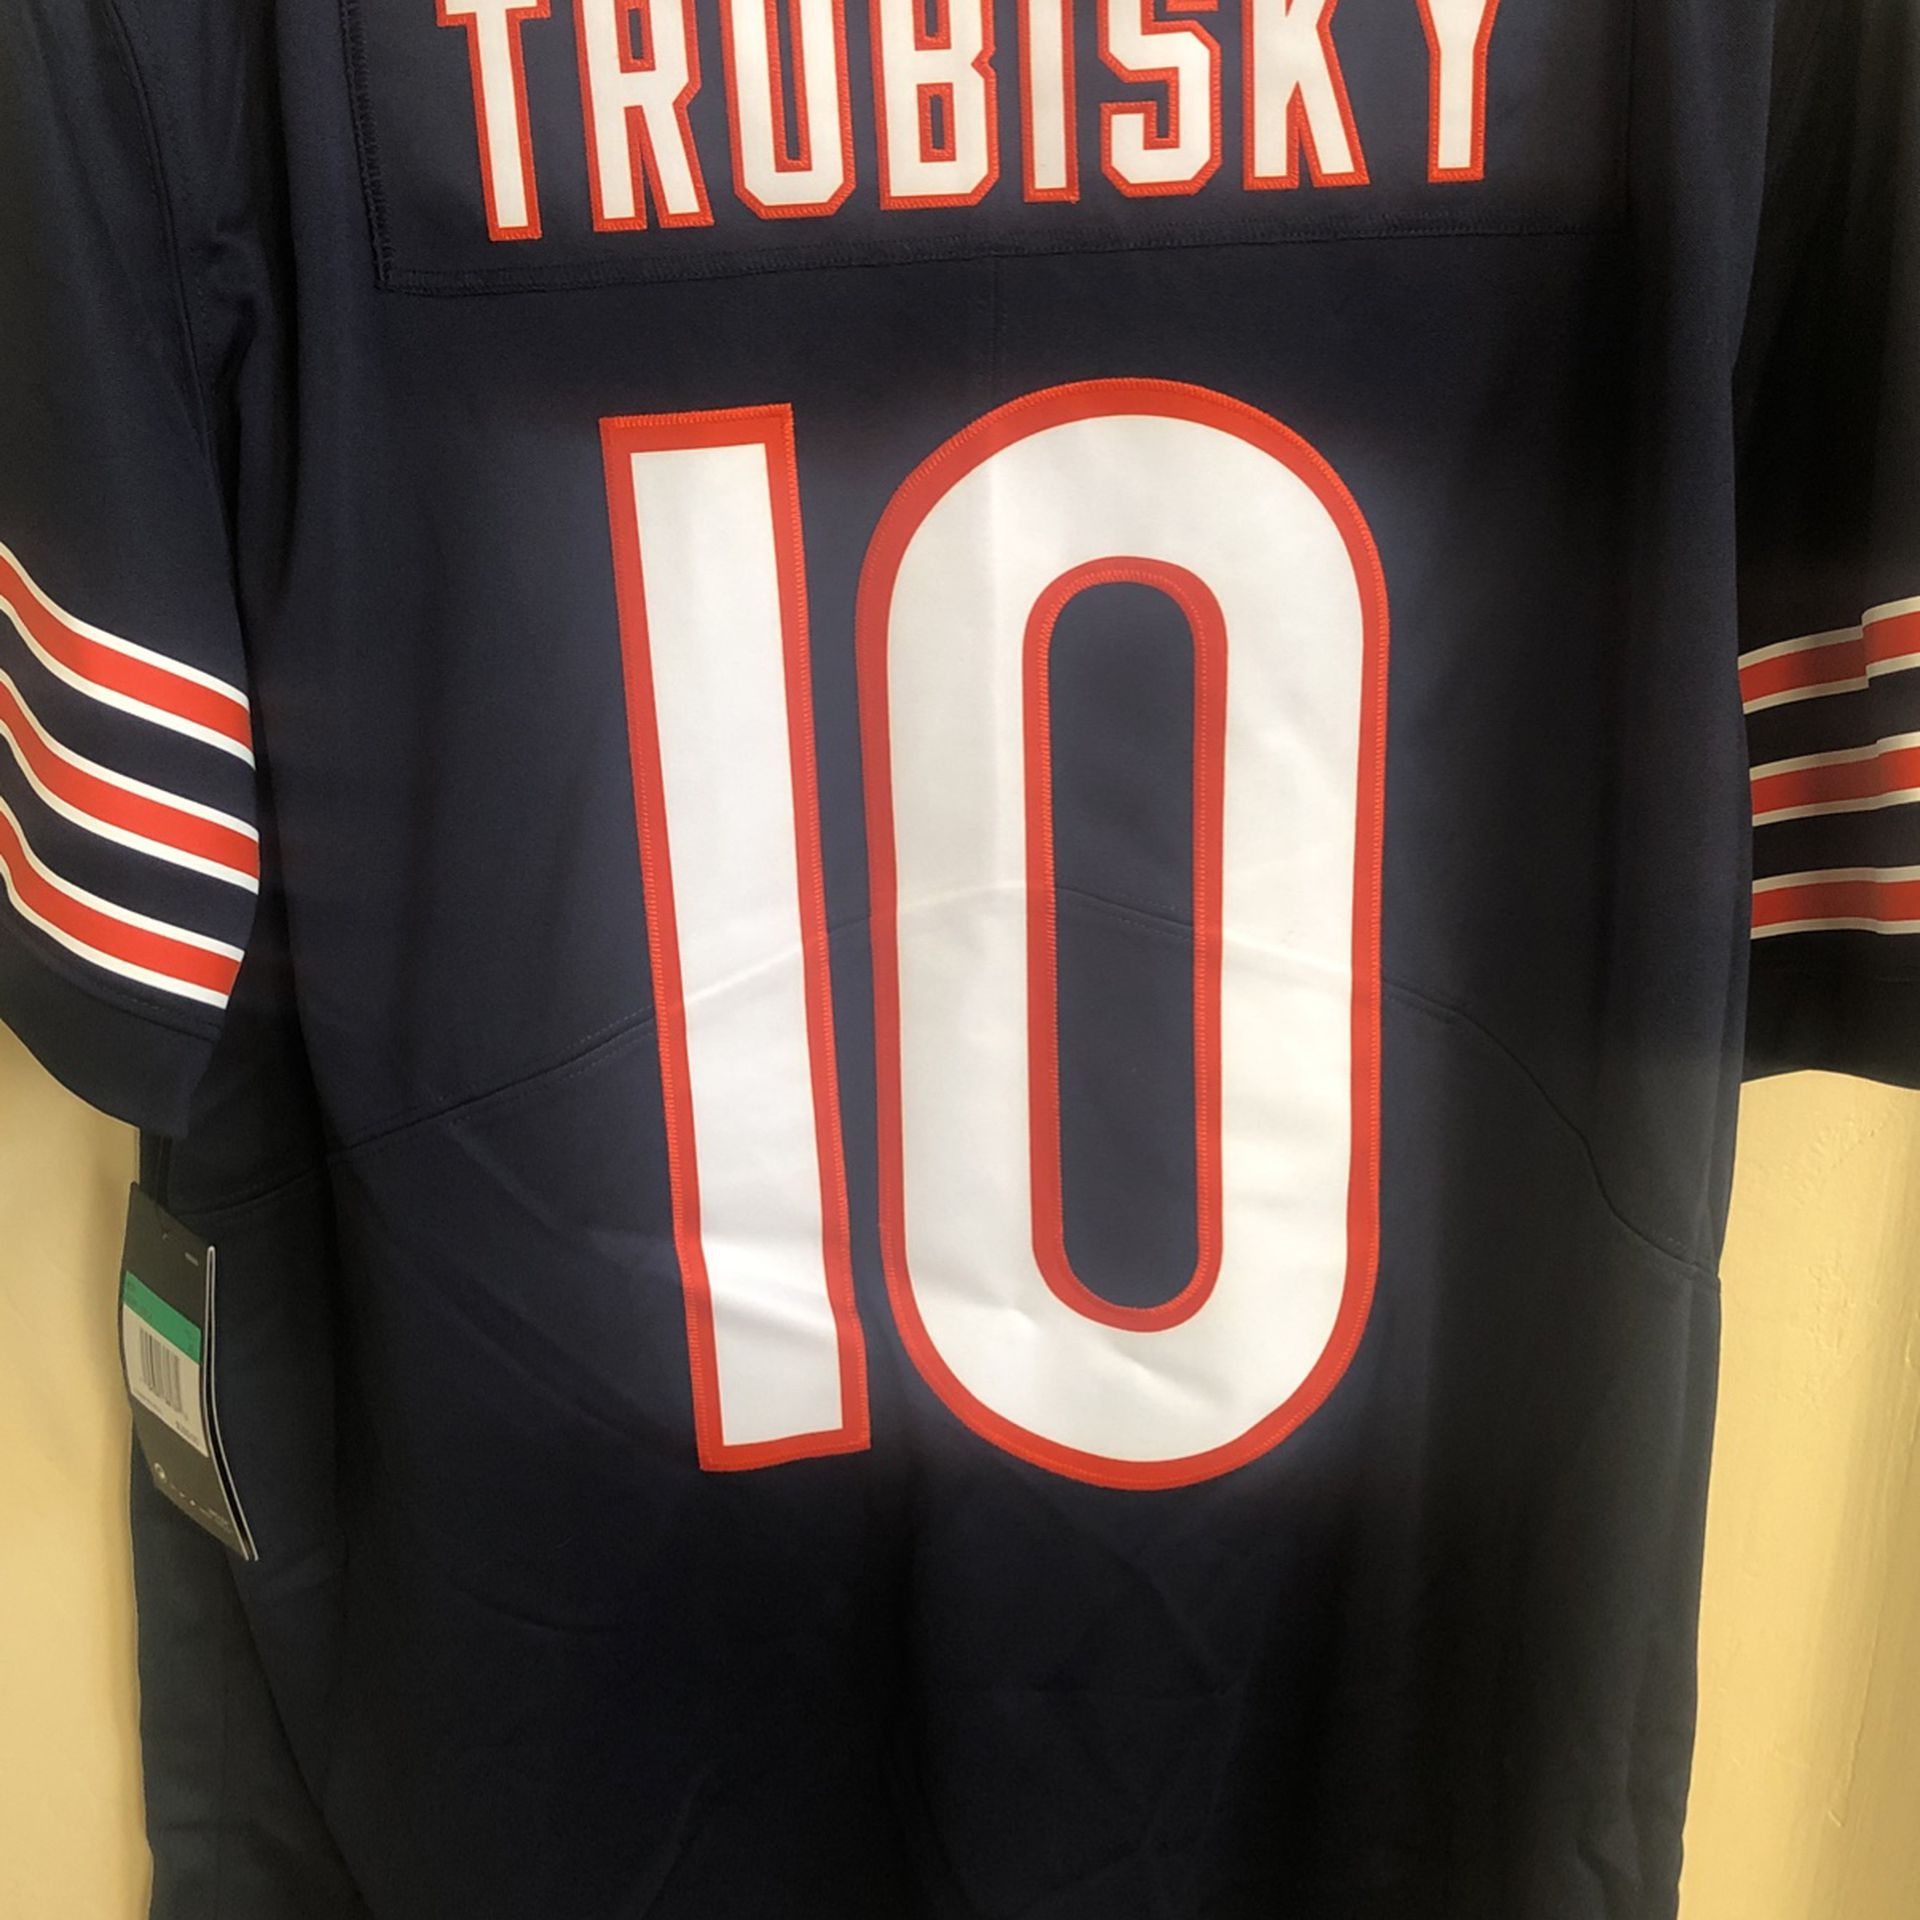 $150 Chicago Bears Trubisky NFL Jersey Authentic Size XL